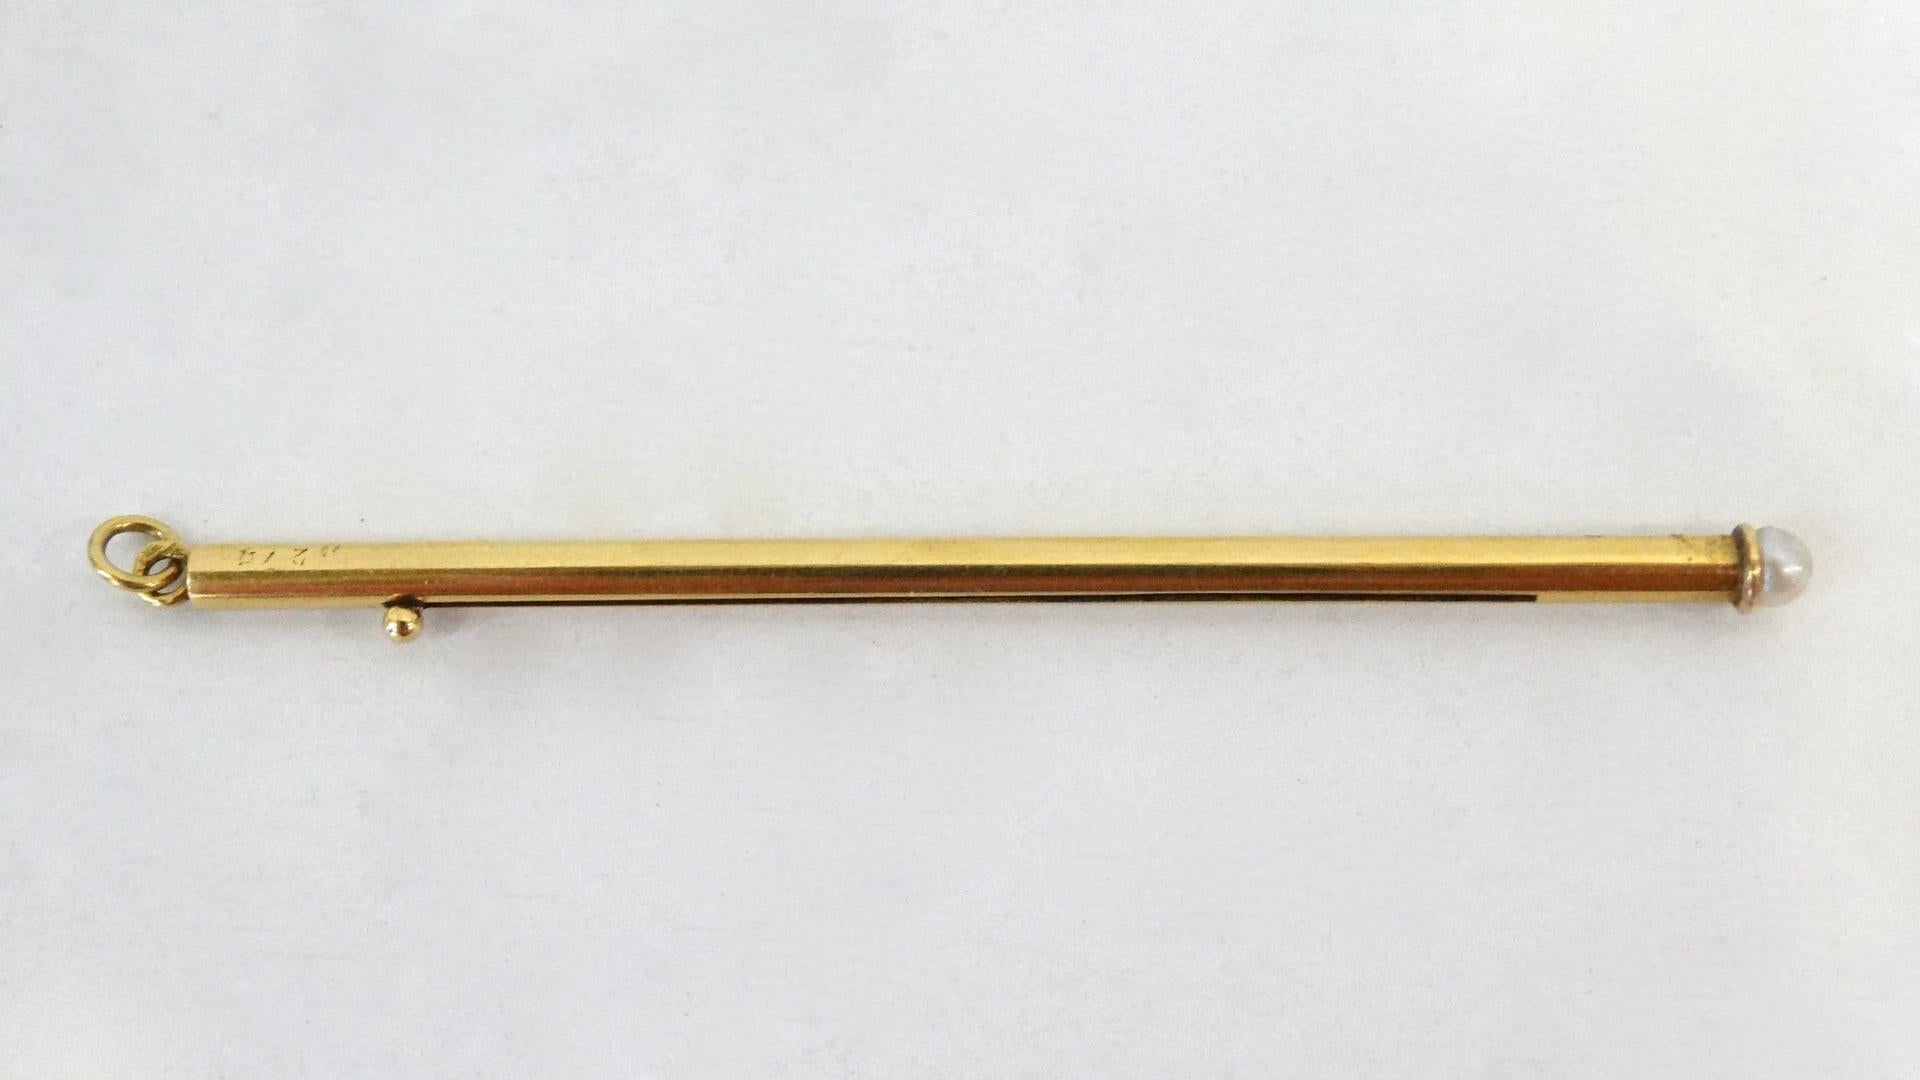  An 18 carat gold Champagne stirrer that can be worn as a pendant,  signed and numbered: Cartier, 279, in velvet case with a natural pearl on middle stem.
weight: 6.90 grams dimensions: 7.5 x 0.5 cm. Made in France. This now-rare device, an 18 carat